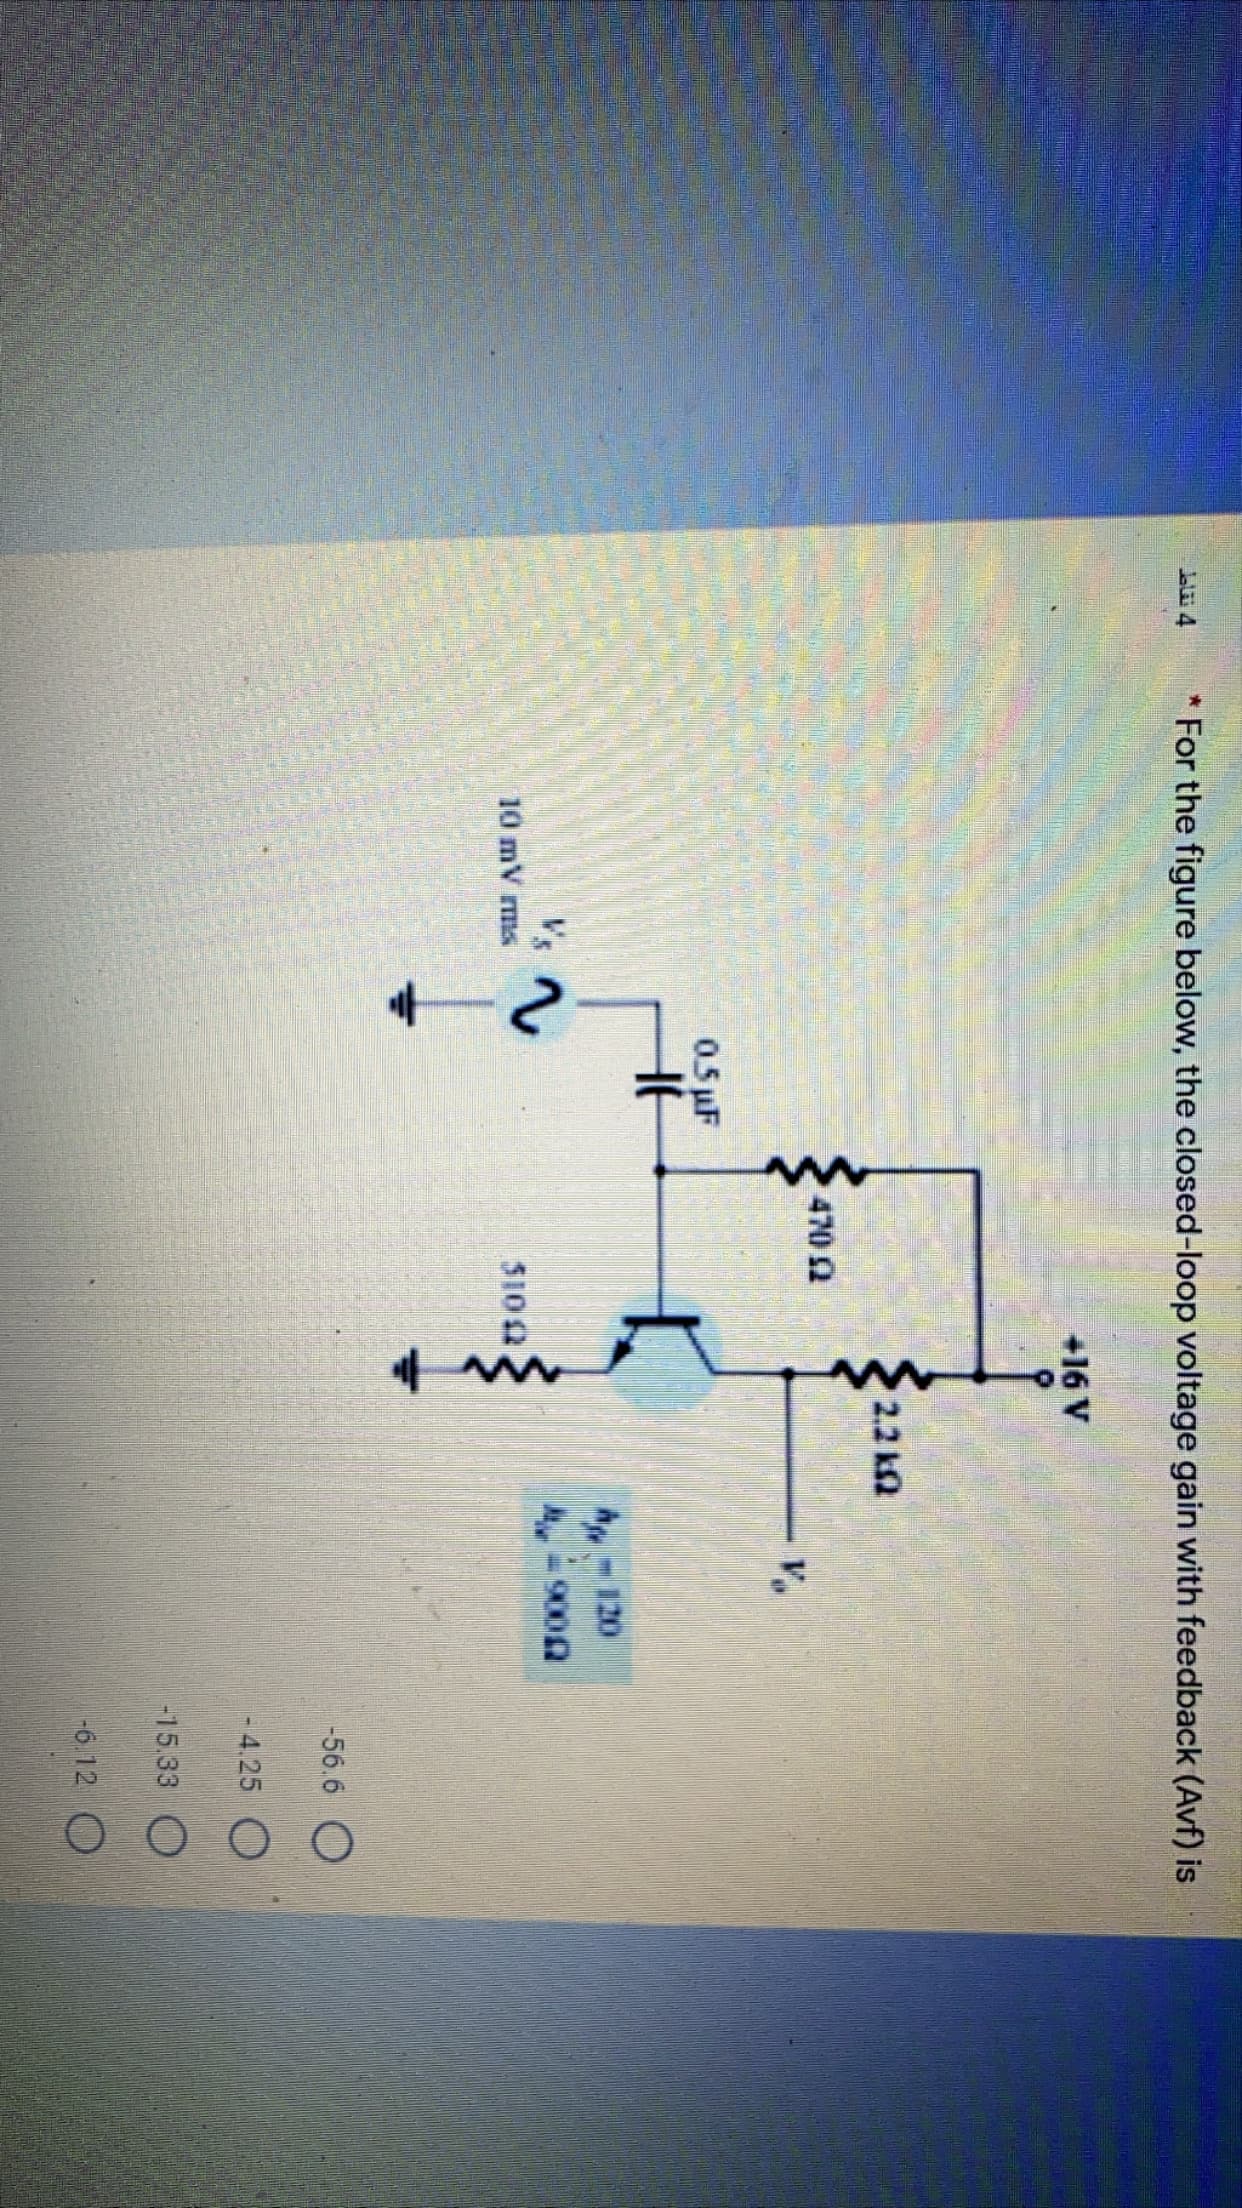 * For the figure below, the closed-loop voltage gain with feedback (Avf) is
